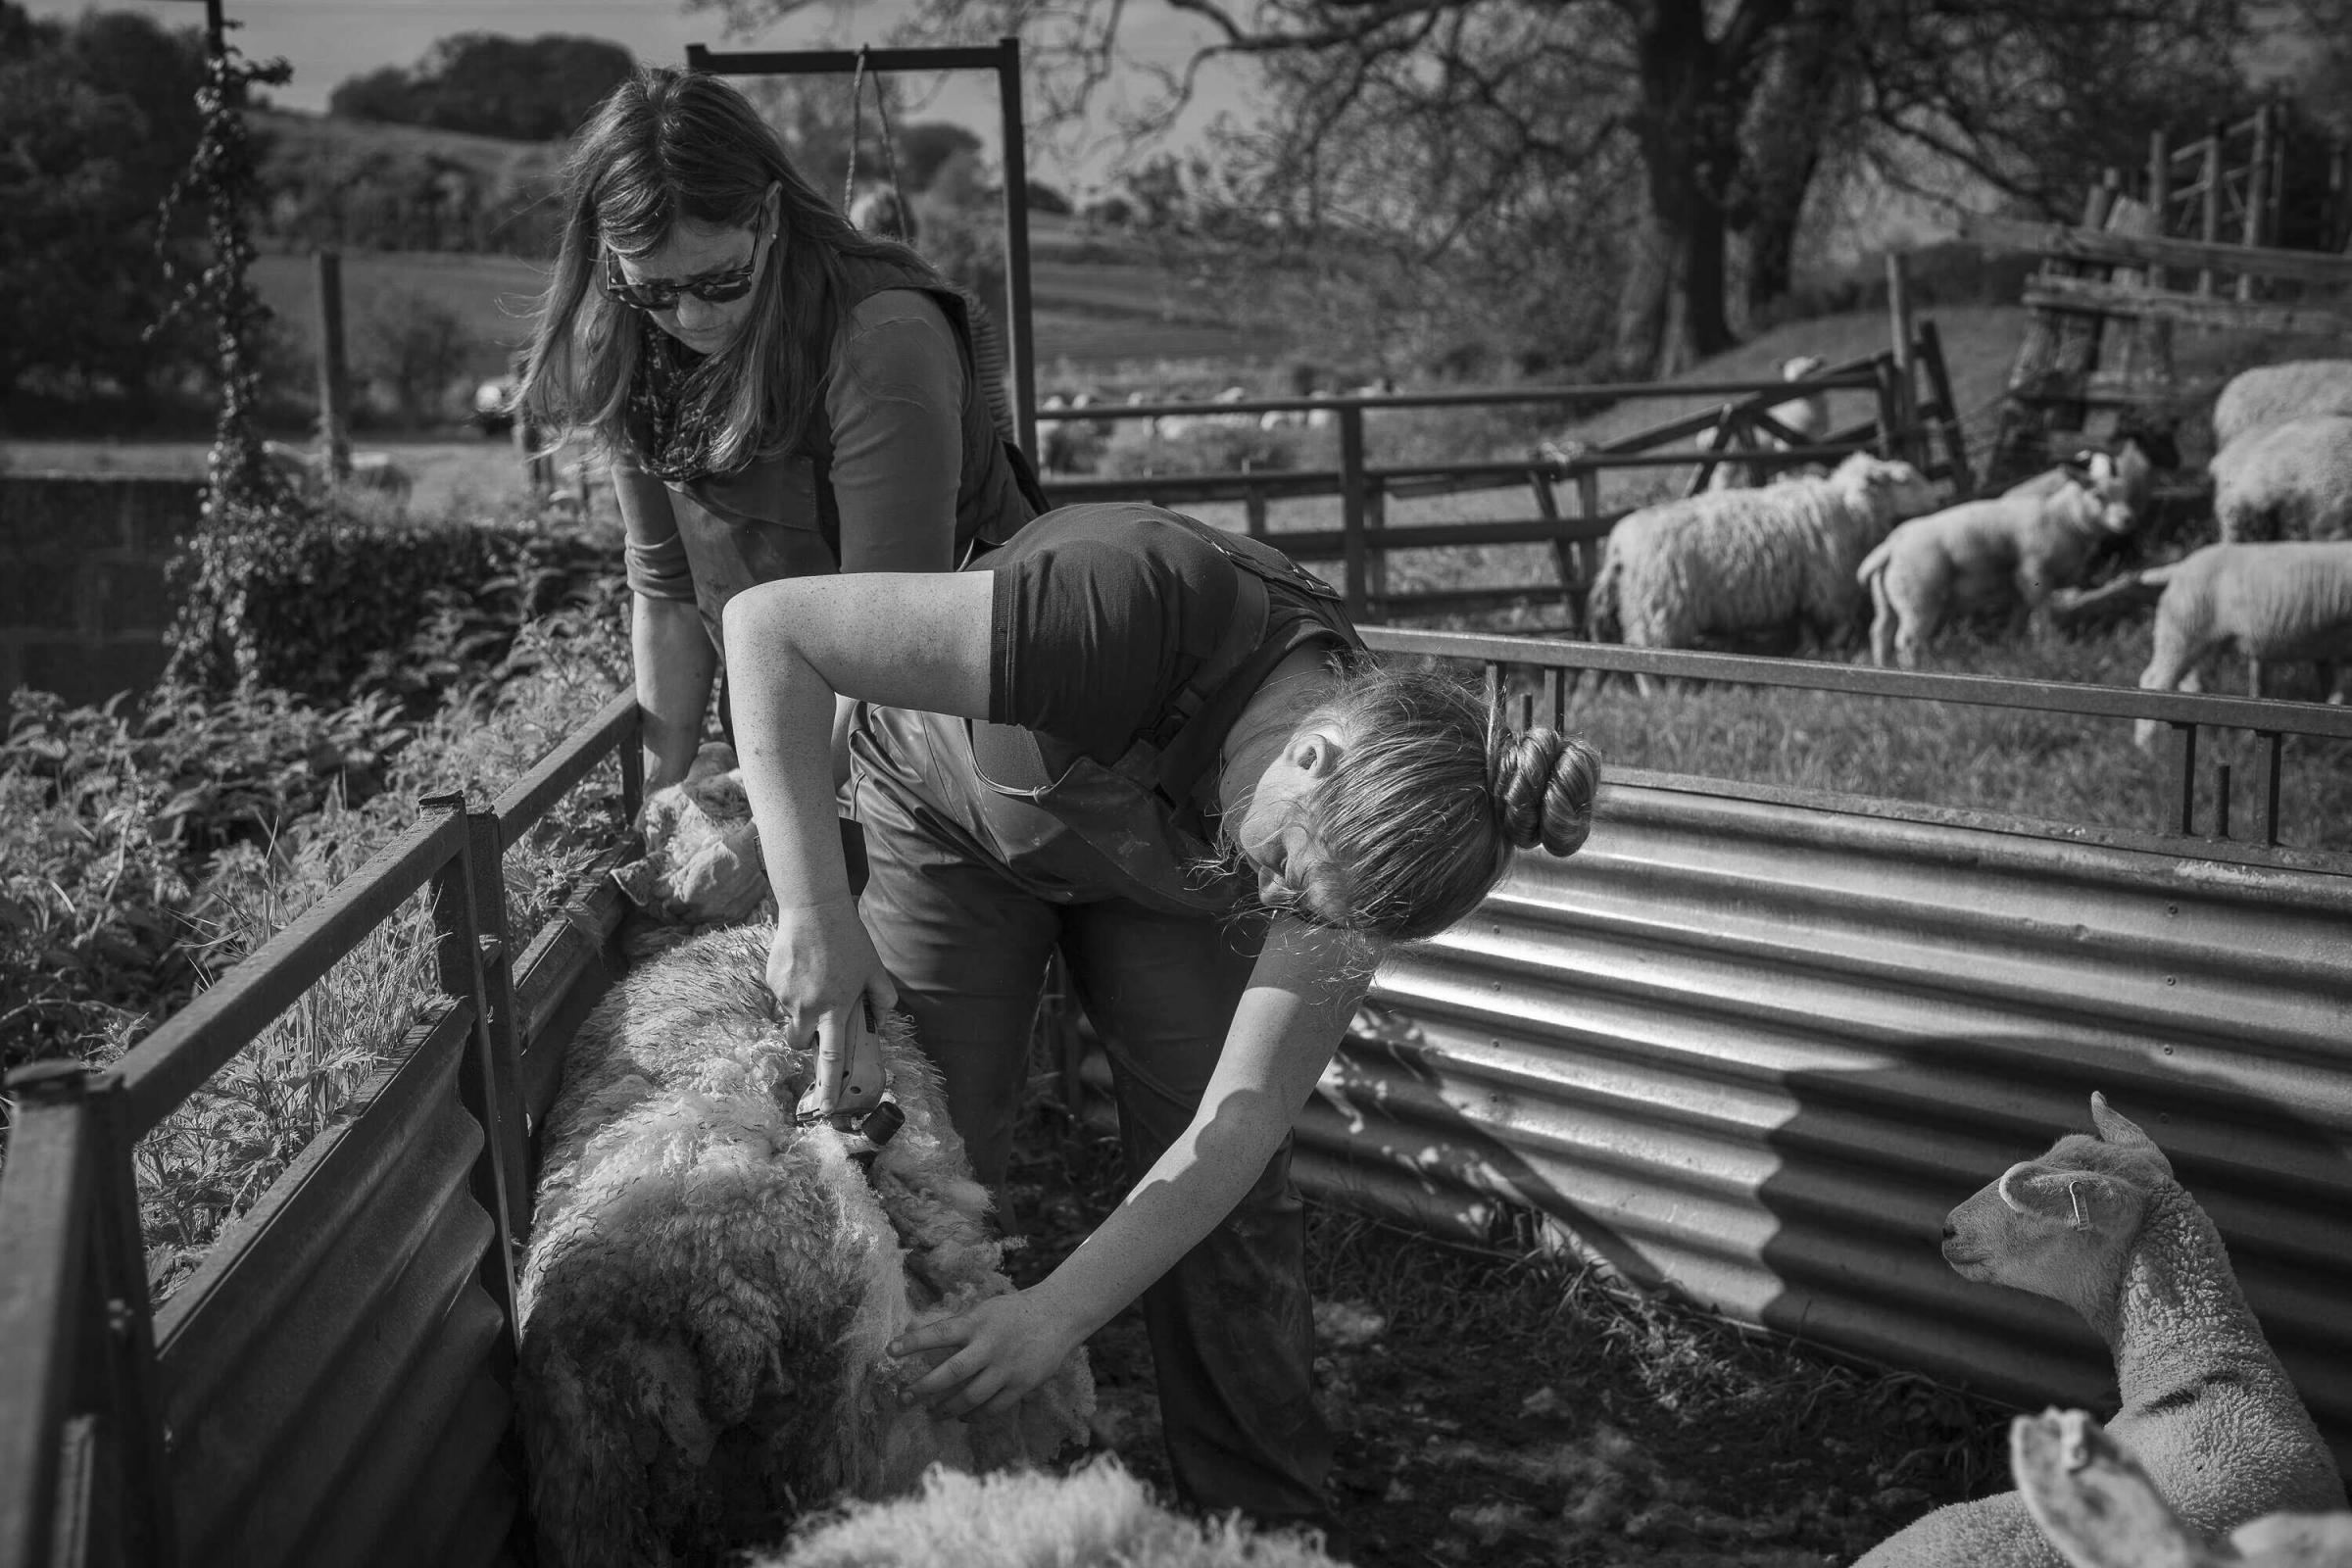 Amanda Shaw and her daughter, Fran, cutting sheep on their farm at Monk Fryston Credit Lucy Saggers